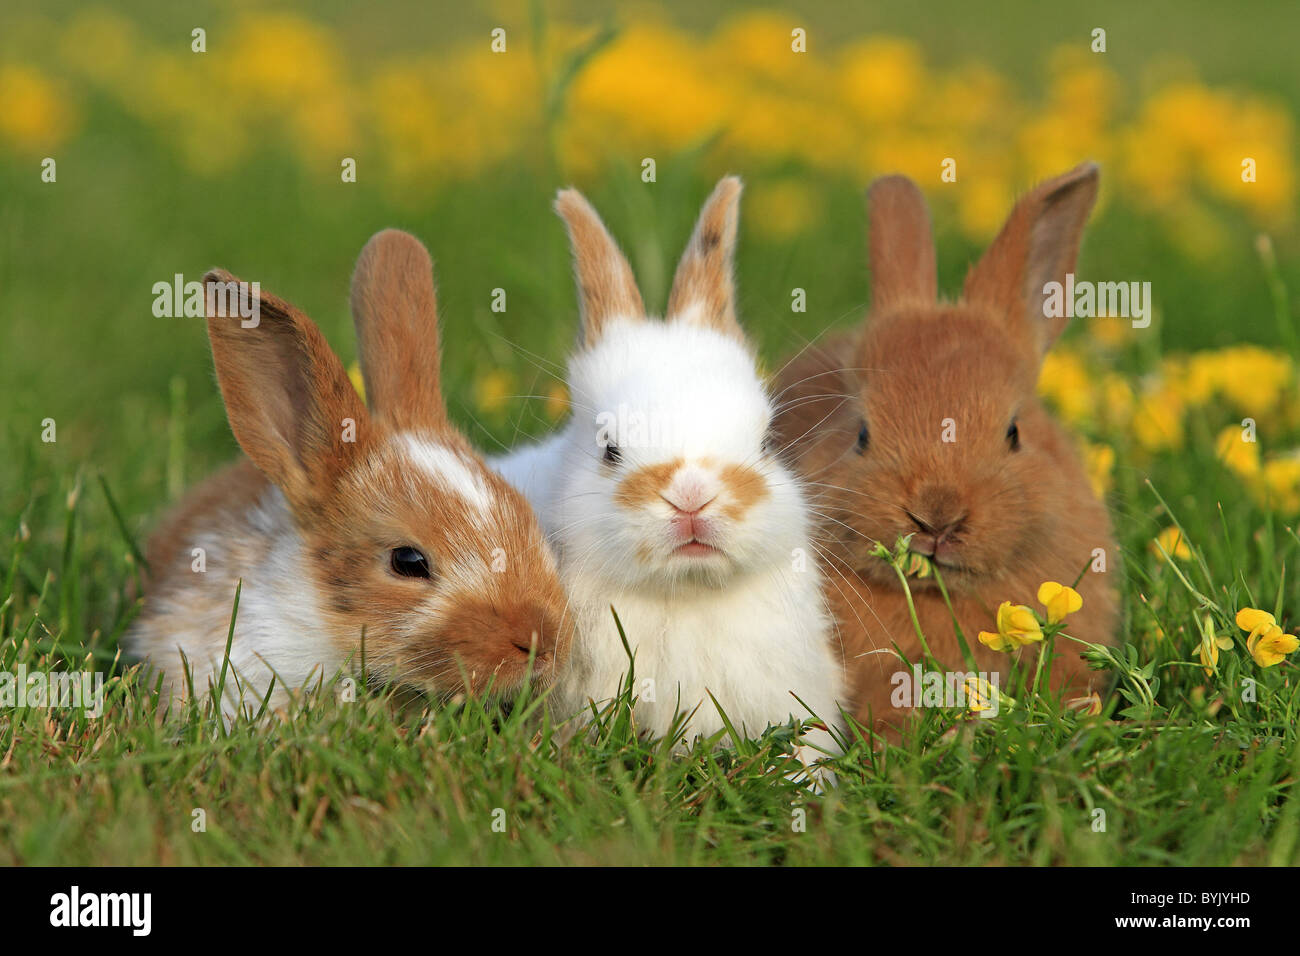 Domestic Rabbit, Dwarf Rabbit (Oryctolagus cuniculus f. domestica). Three individuals in a flowering meadow. Stock Photo